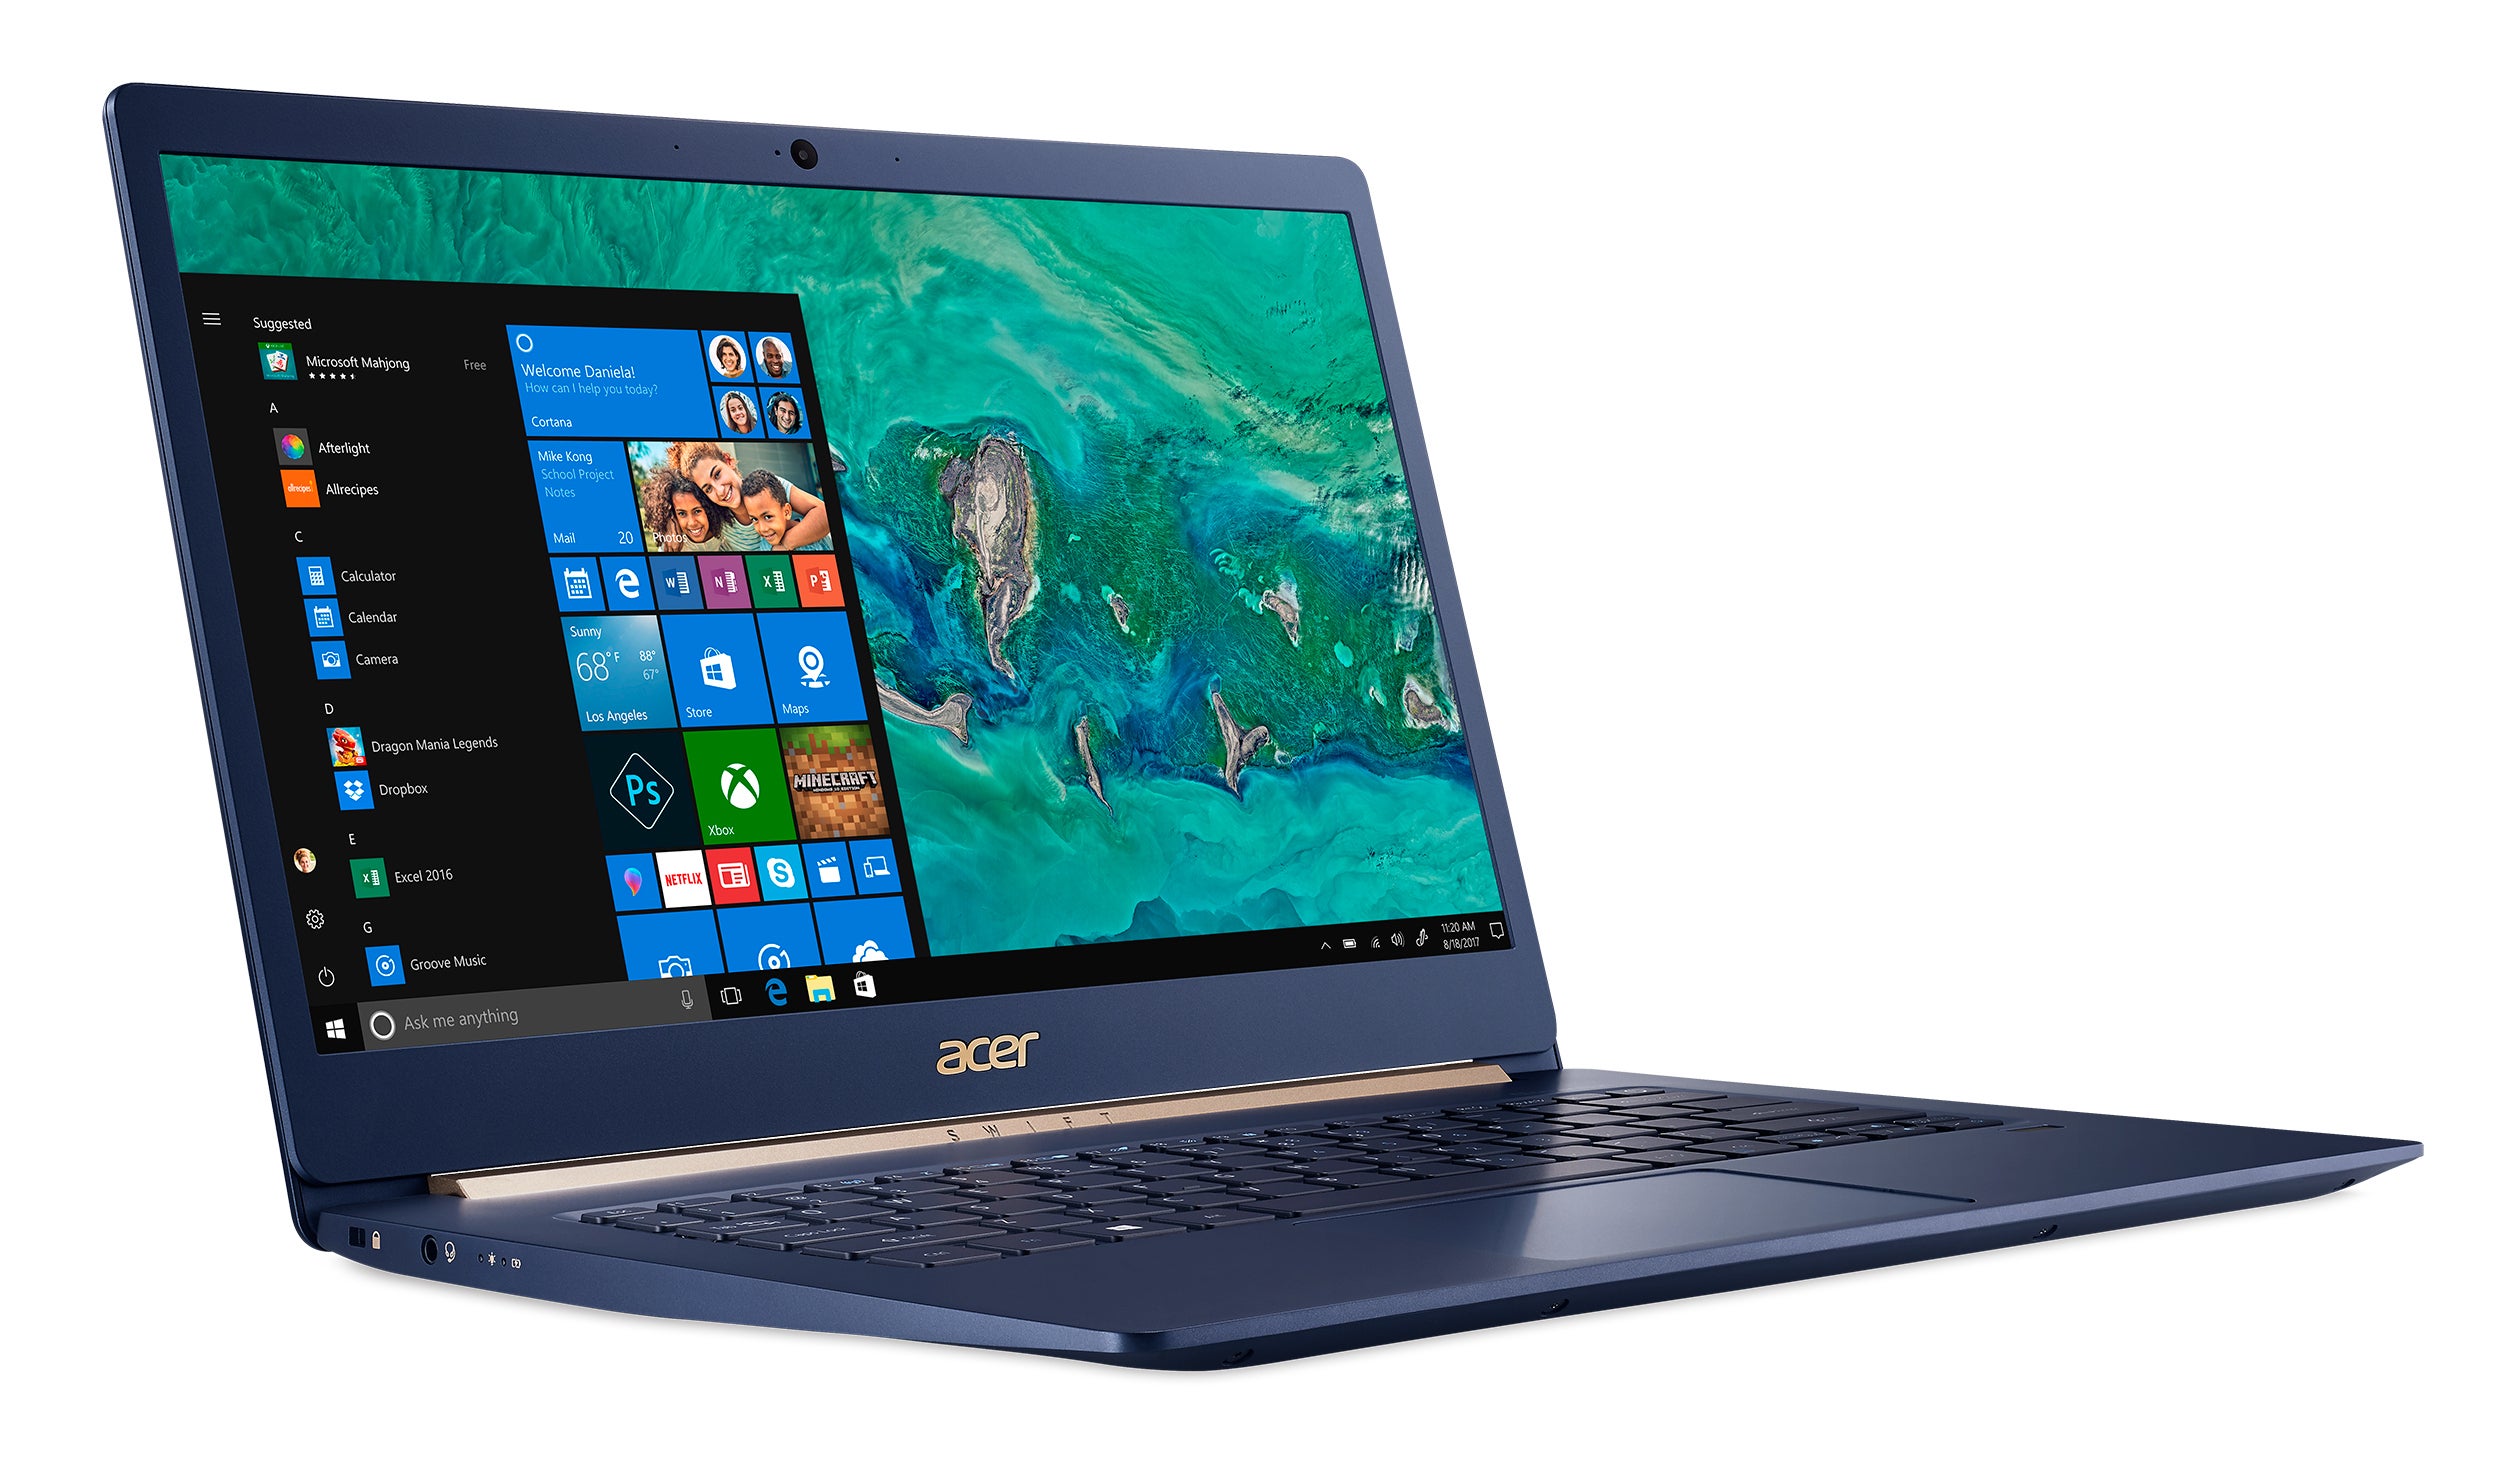 Acer's Swift 5 aims to be the lightest laptop to include Intel's new